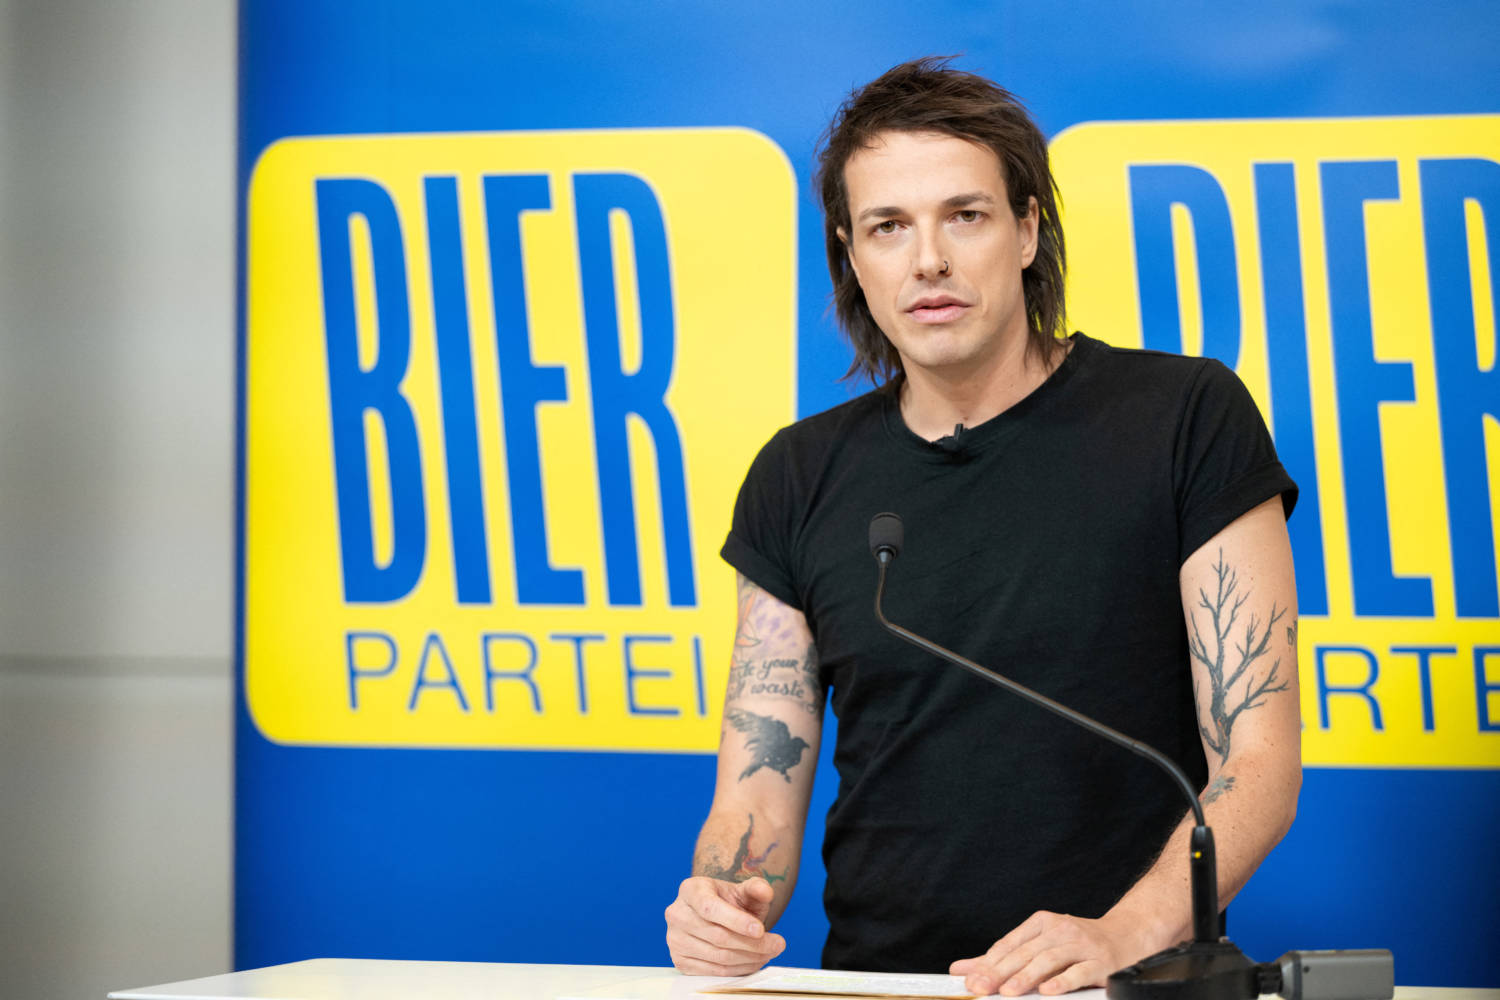 Austria's Beer Party Announces That It Will Run For Parliament